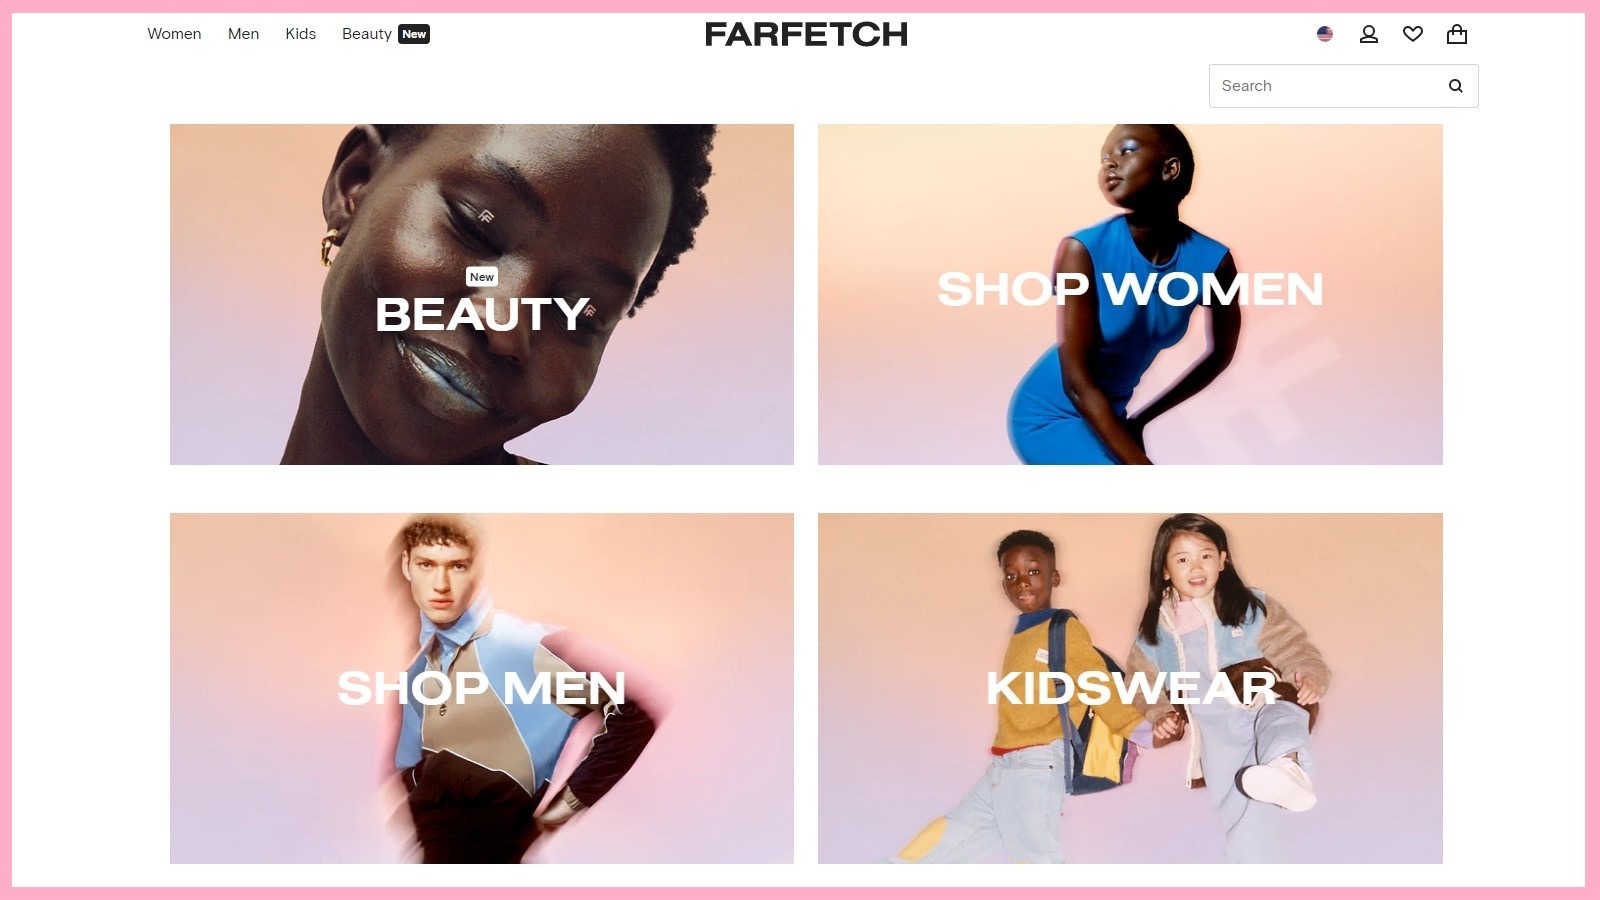 Farfetch Clothing Review: Is FarFetch Real or Fake?